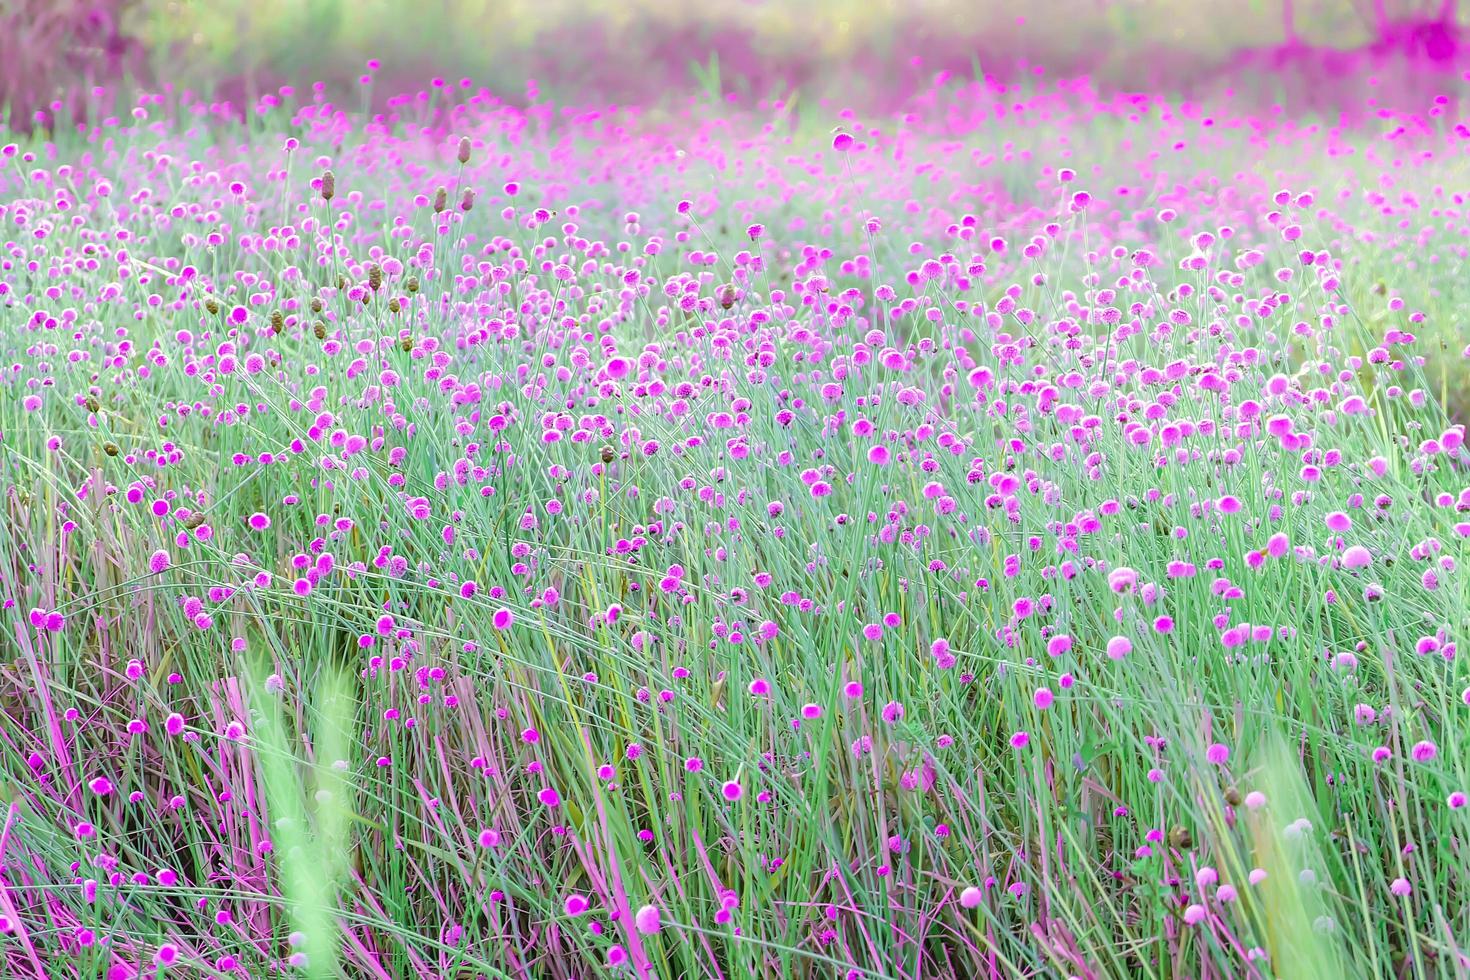 Blurred,Pink wild flower fields.Beautiful growing and blooming in the nature photo